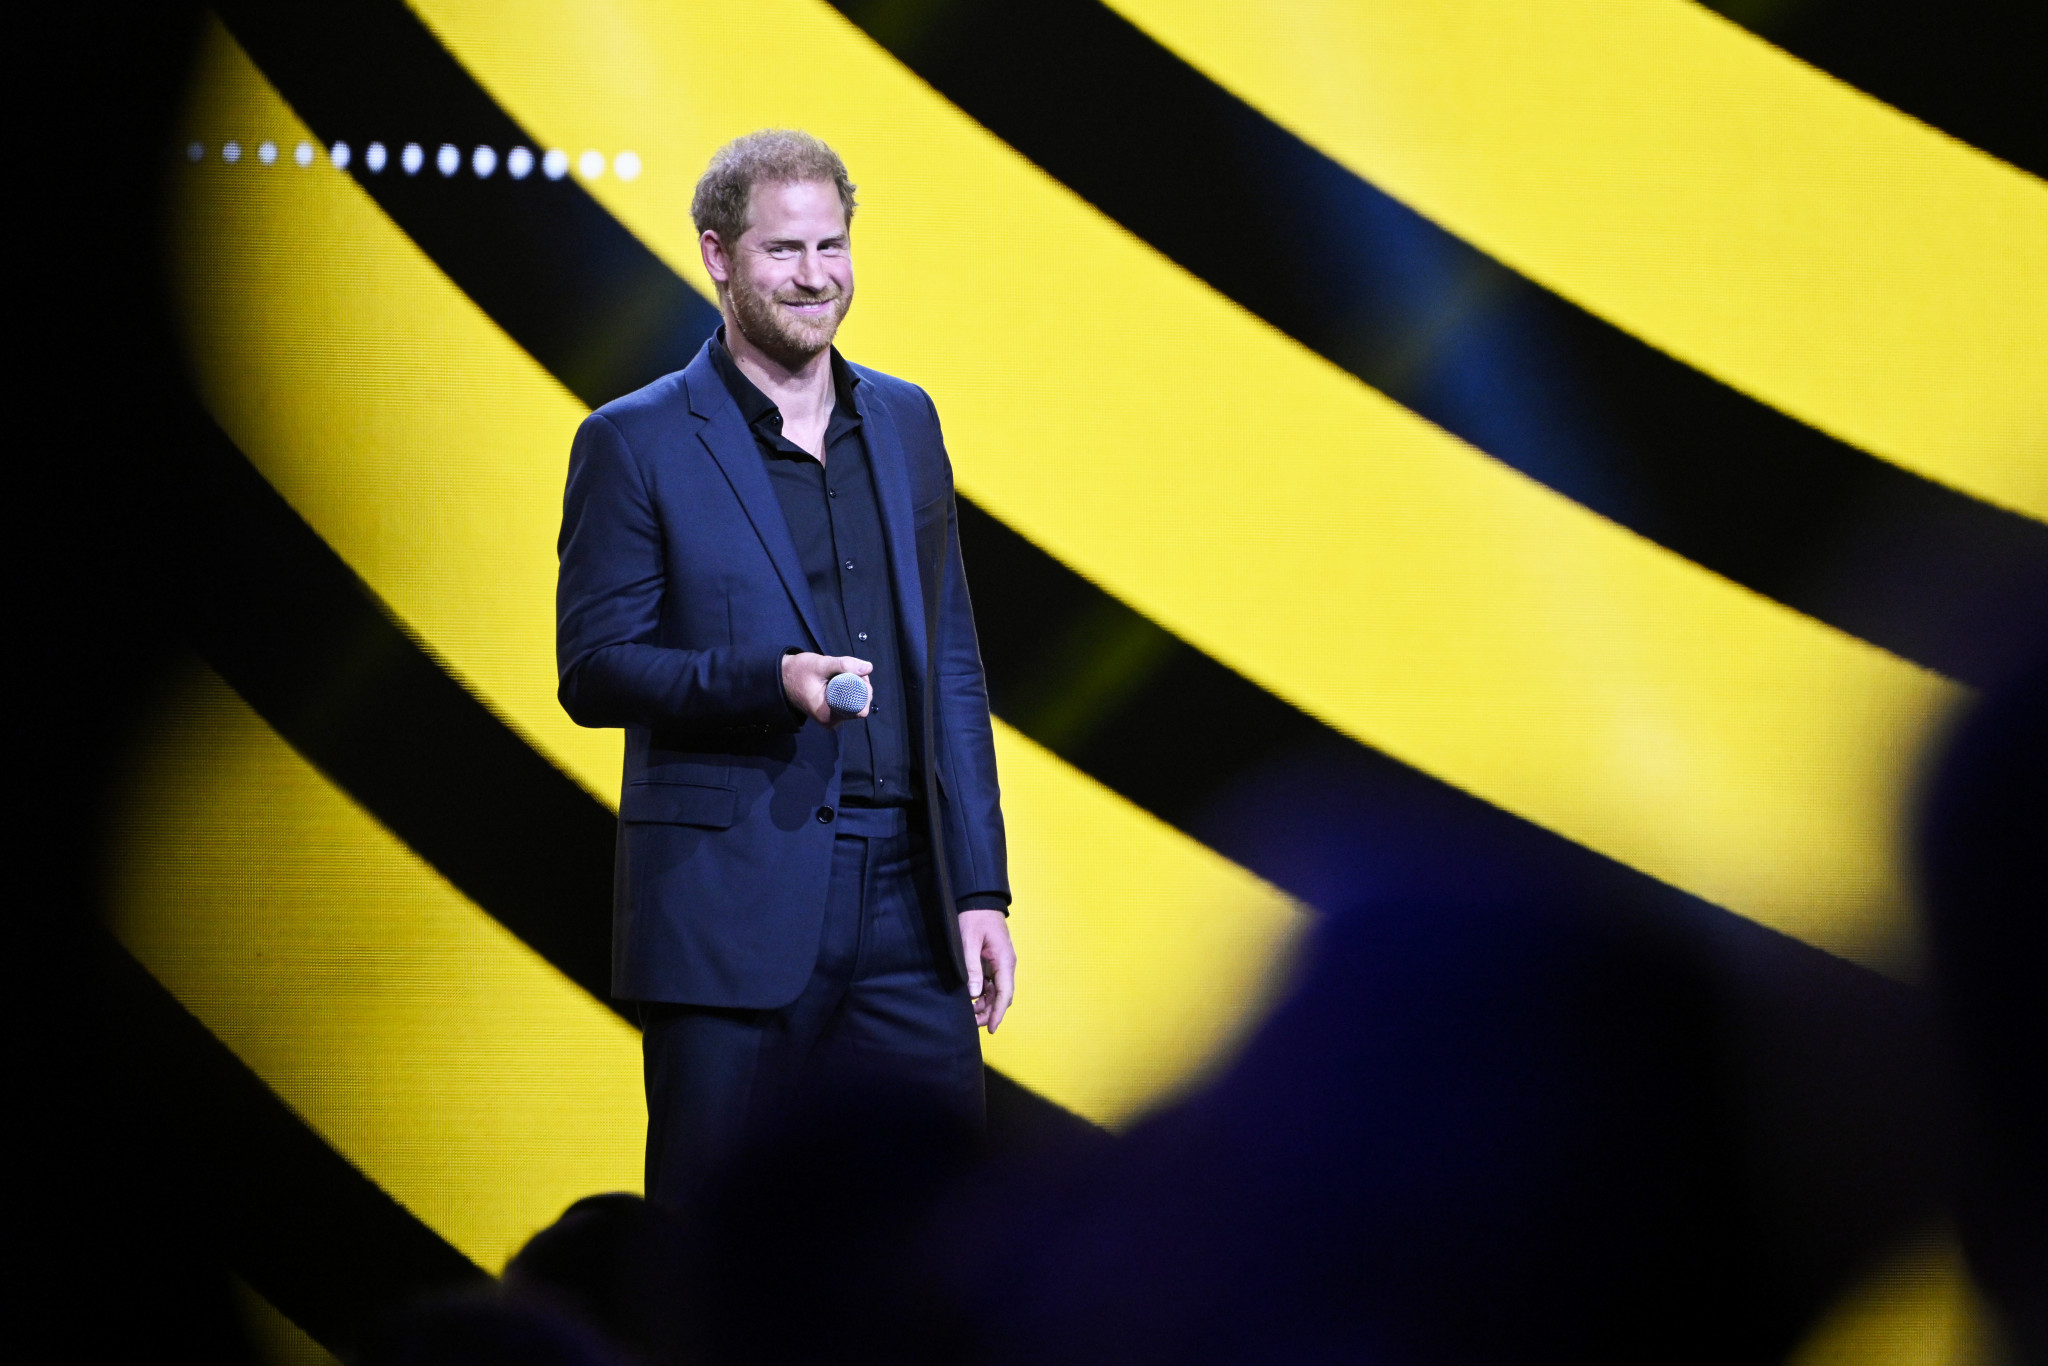 Prince Harry tells Invictus Games athletes they have been "a shining example to us all"